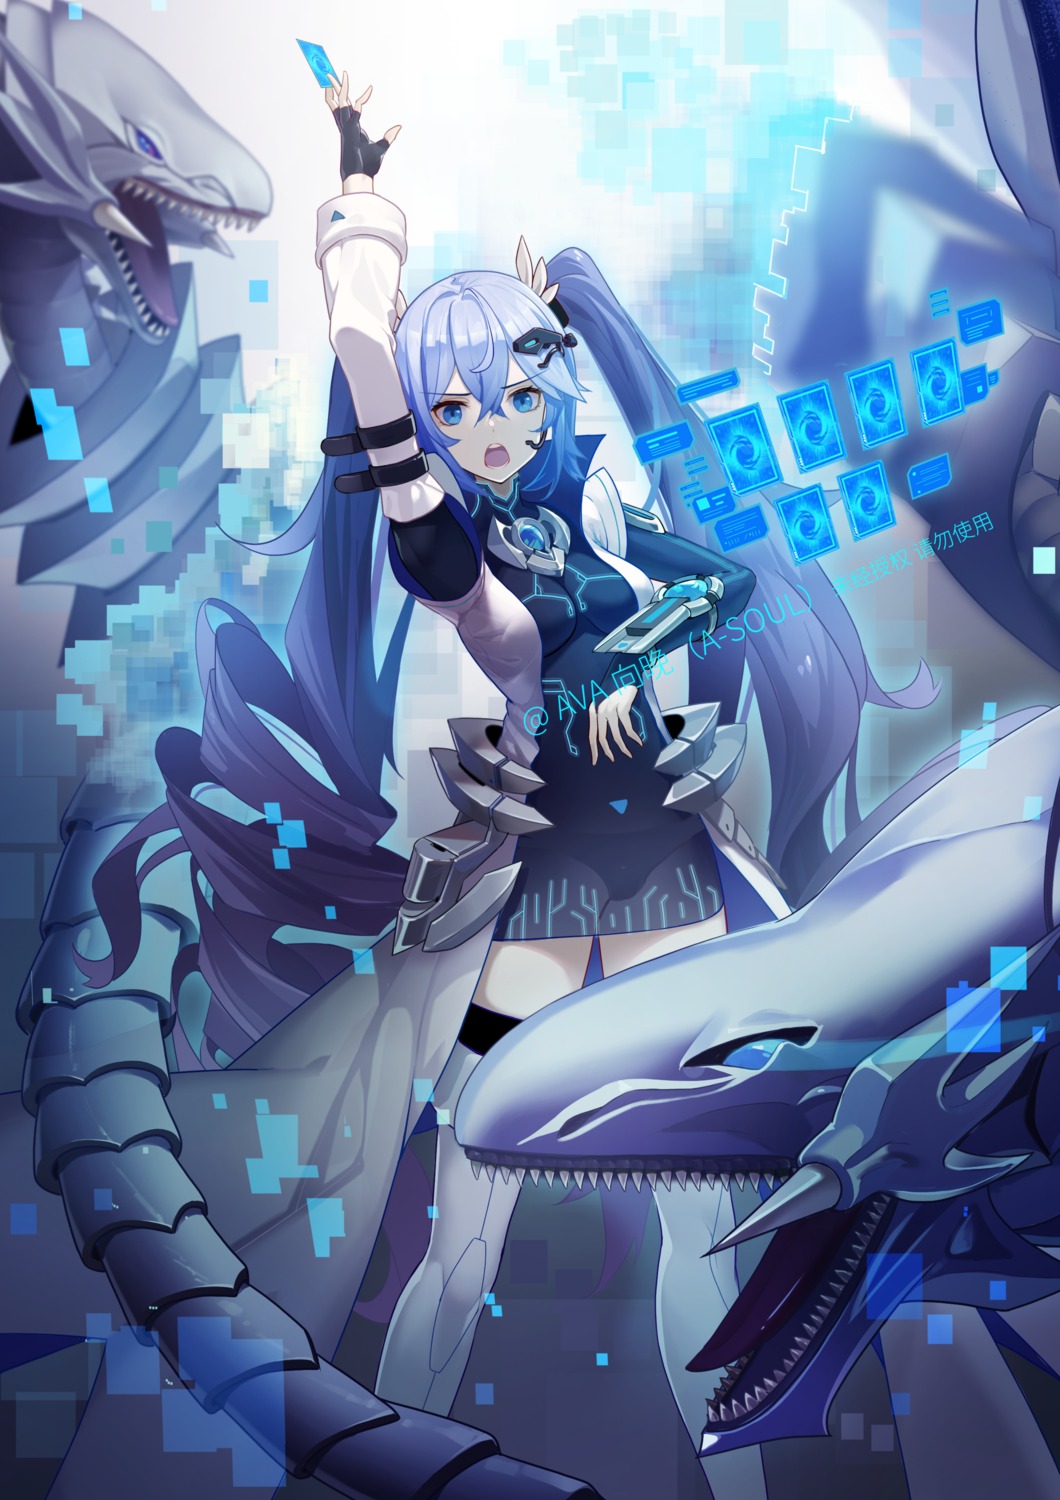 a-soul ava_(a-soul) blue_eyes_white_dragon cheeky_little_star crossover dress monster pantsu see_through thighhighs yugioh